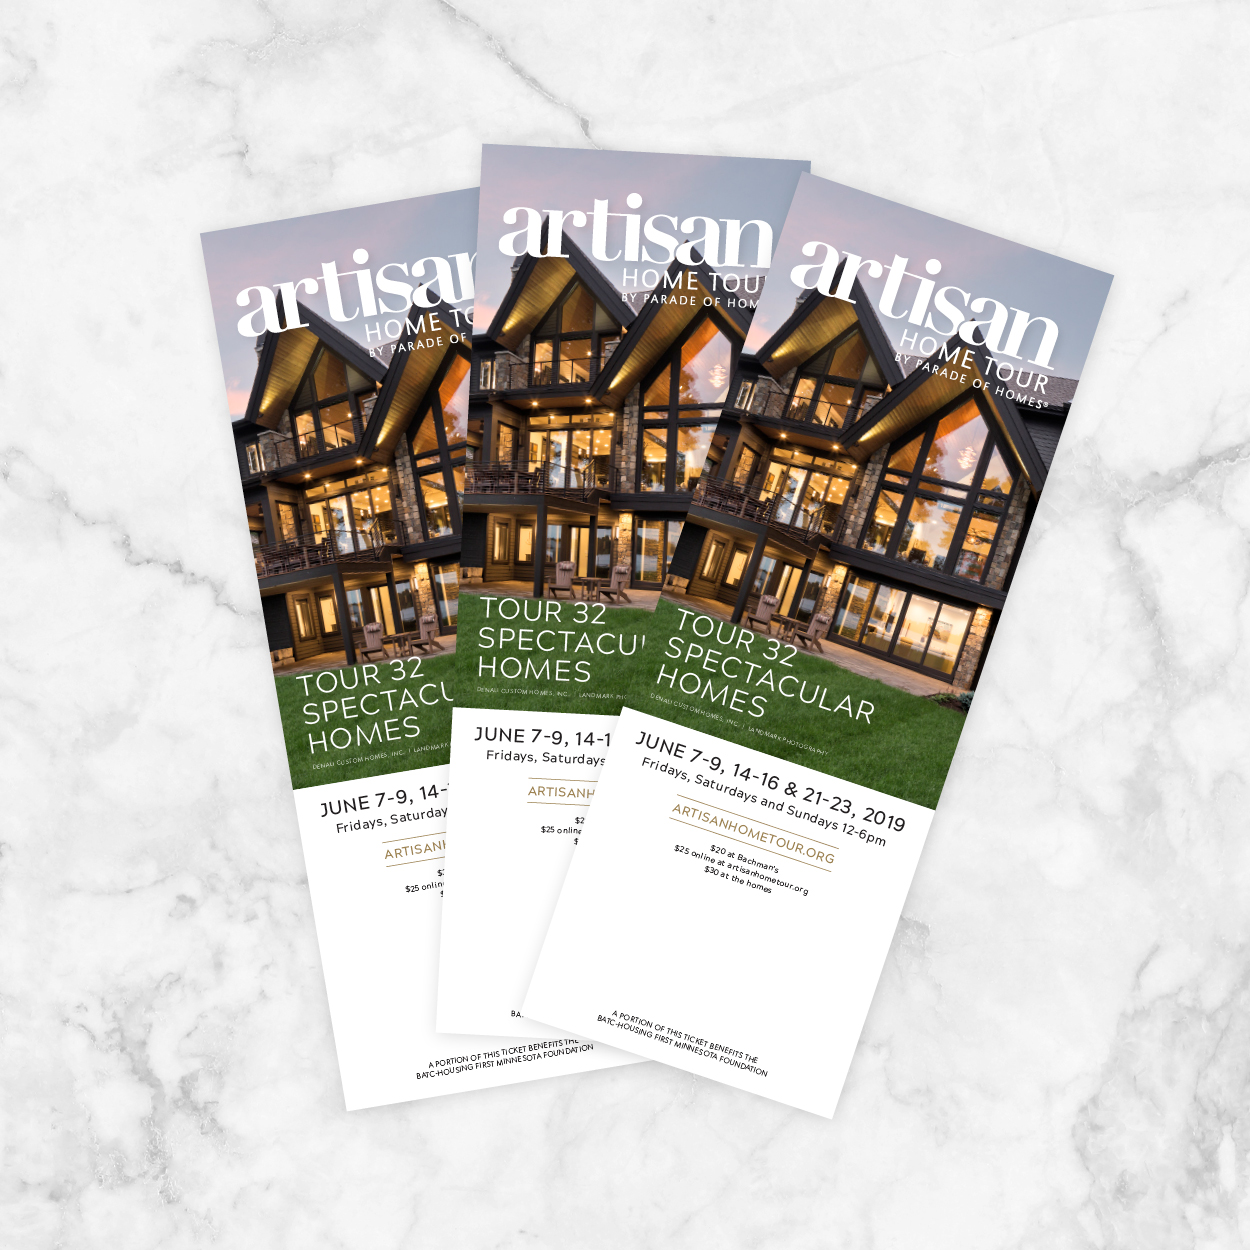 Image for Facts About the 2019 Artisan Home Tour by Parade of Homes